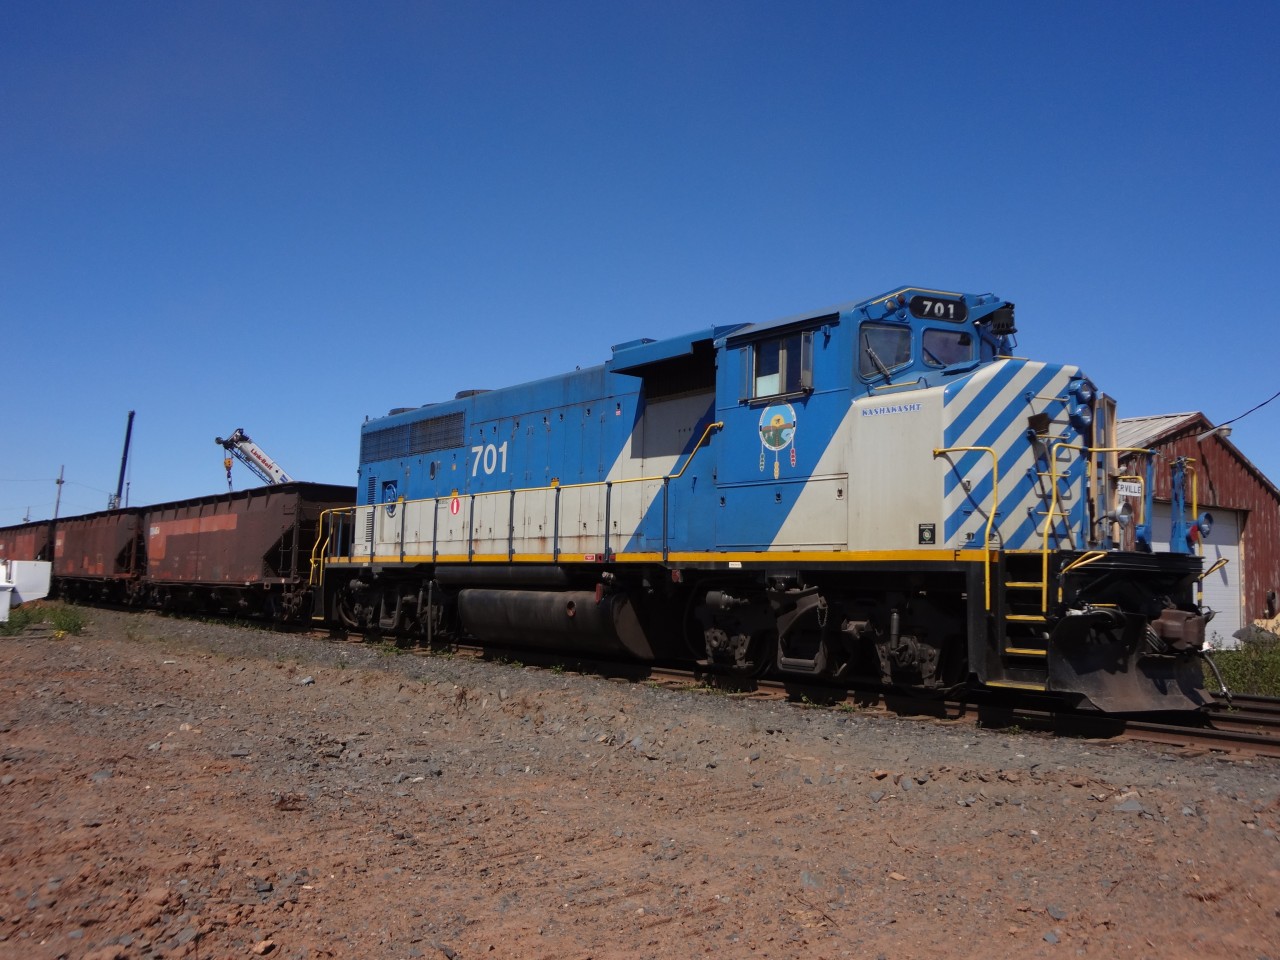 TSH 701 sits connected to a string of well used ballast cars in Schefferville yard on this pleasant early summer day.